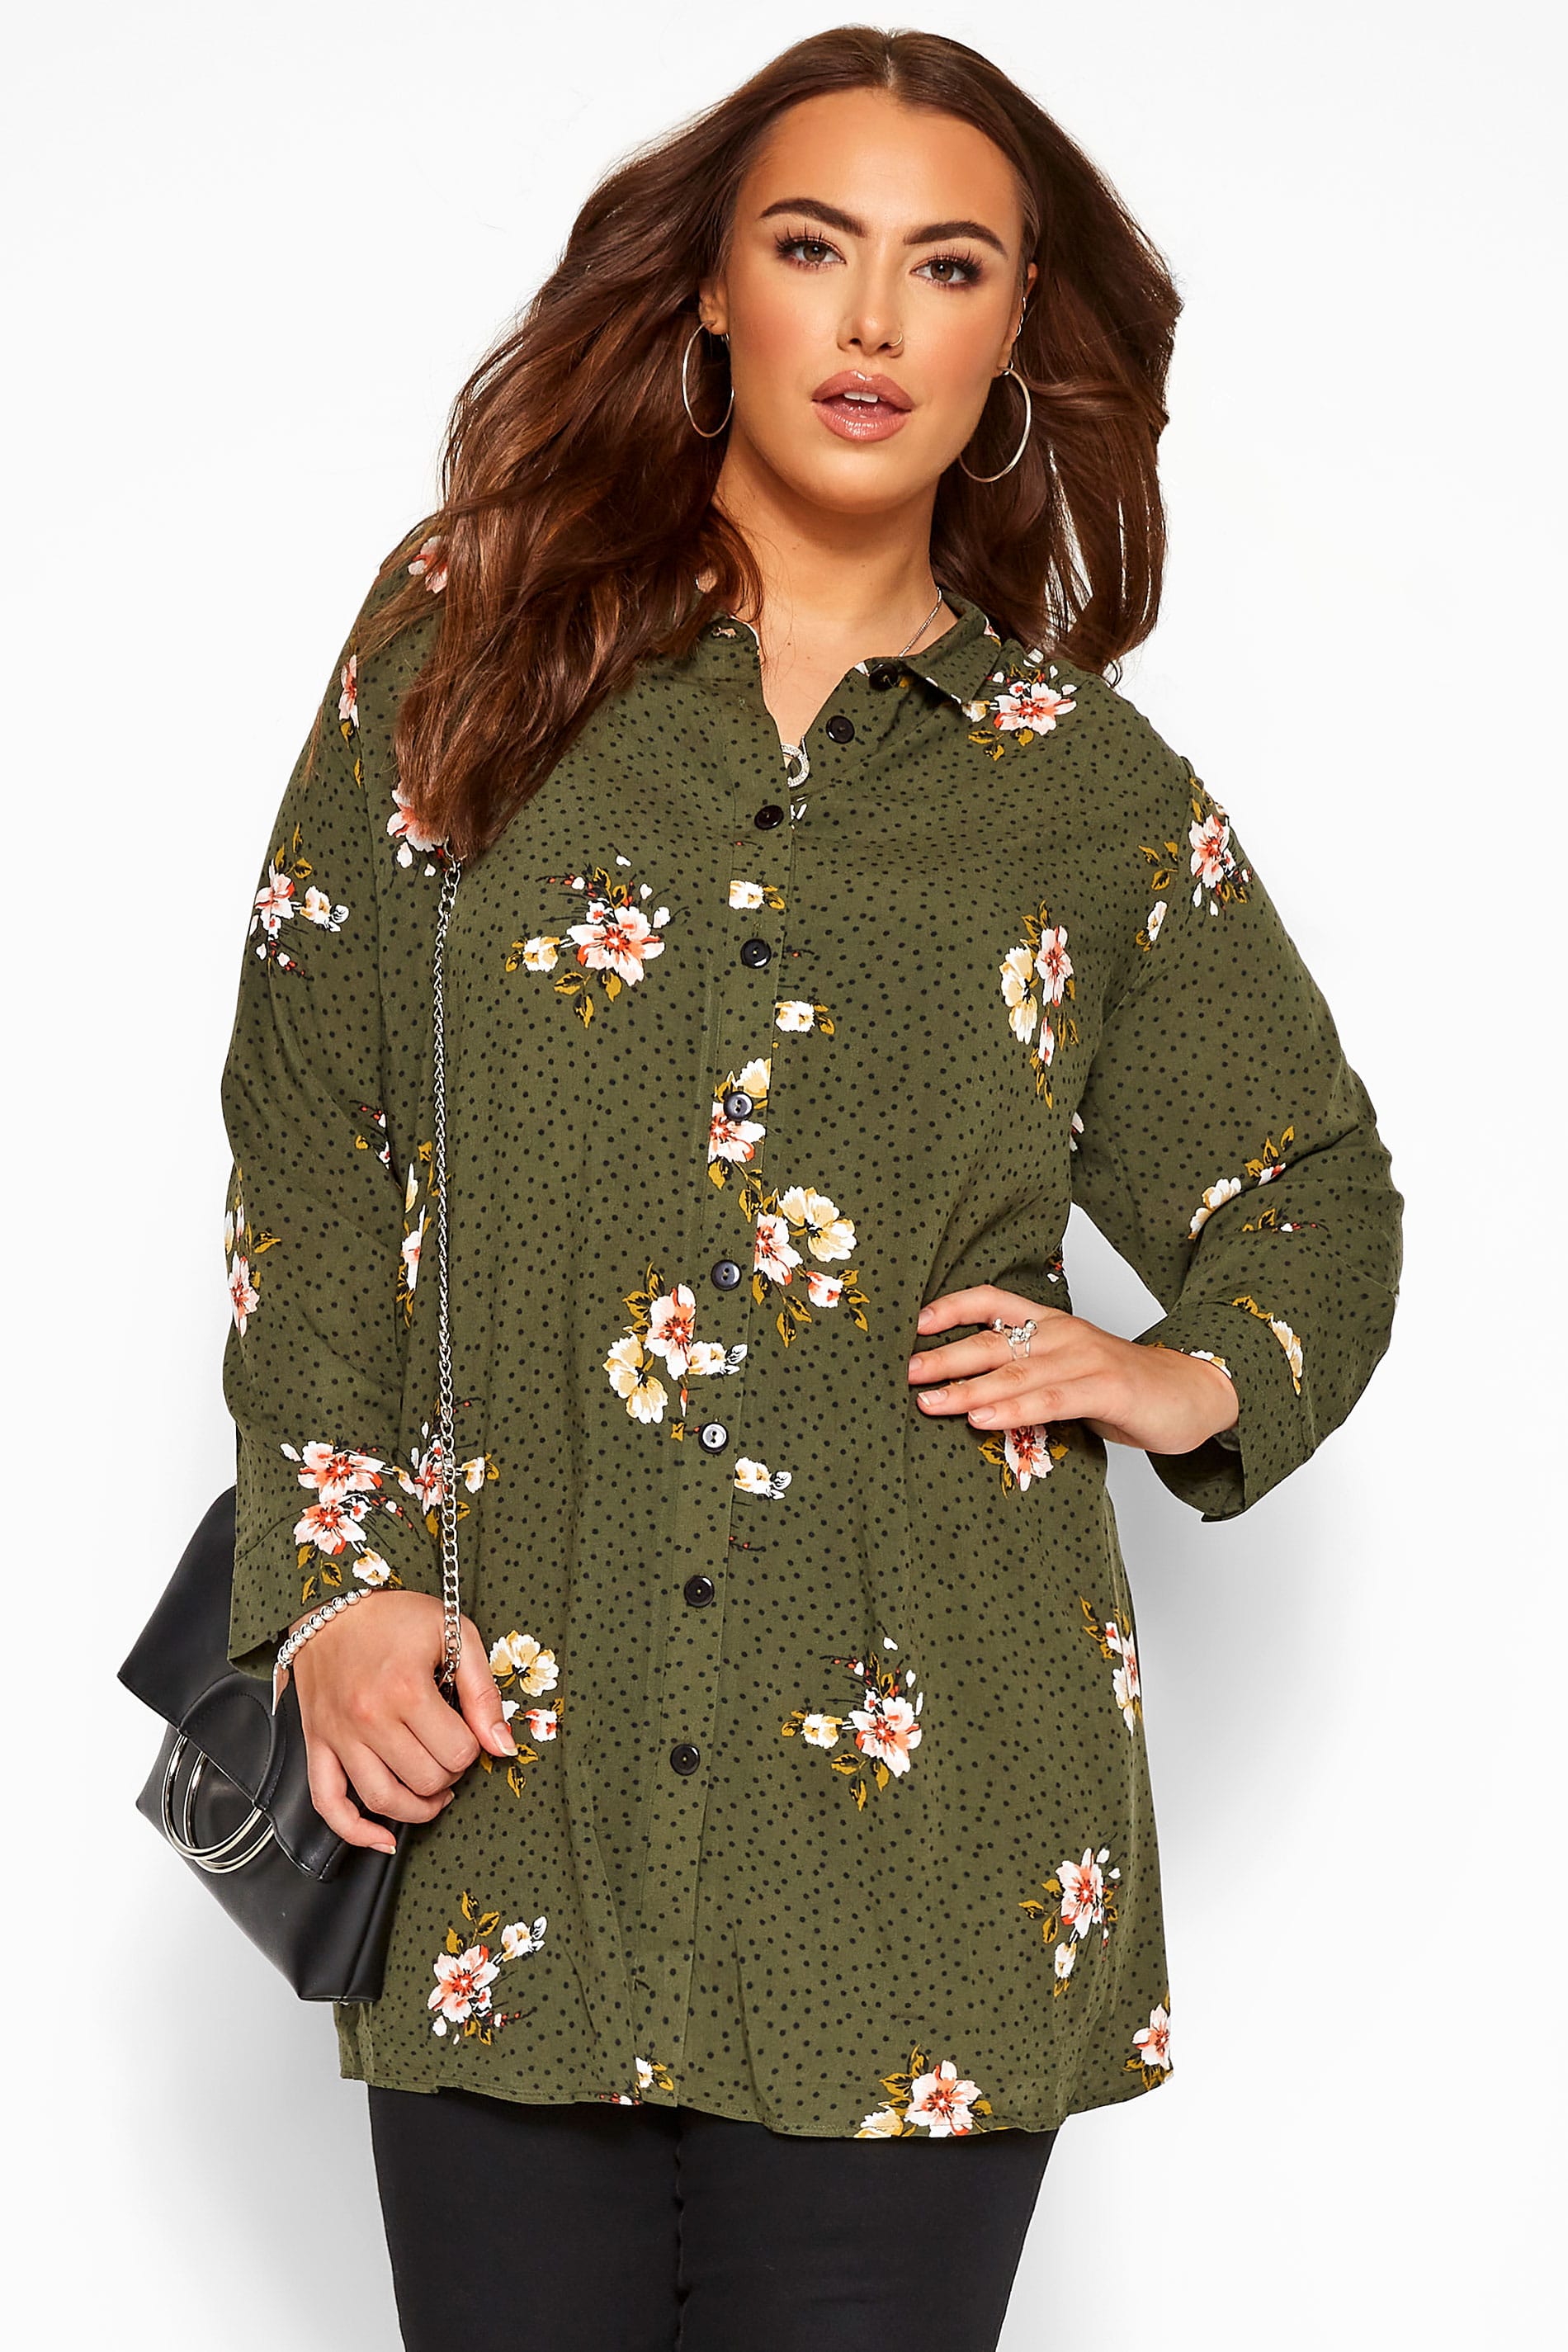 Yours Clothing Women S Plus Size Floral Spotted Shirt Ebay